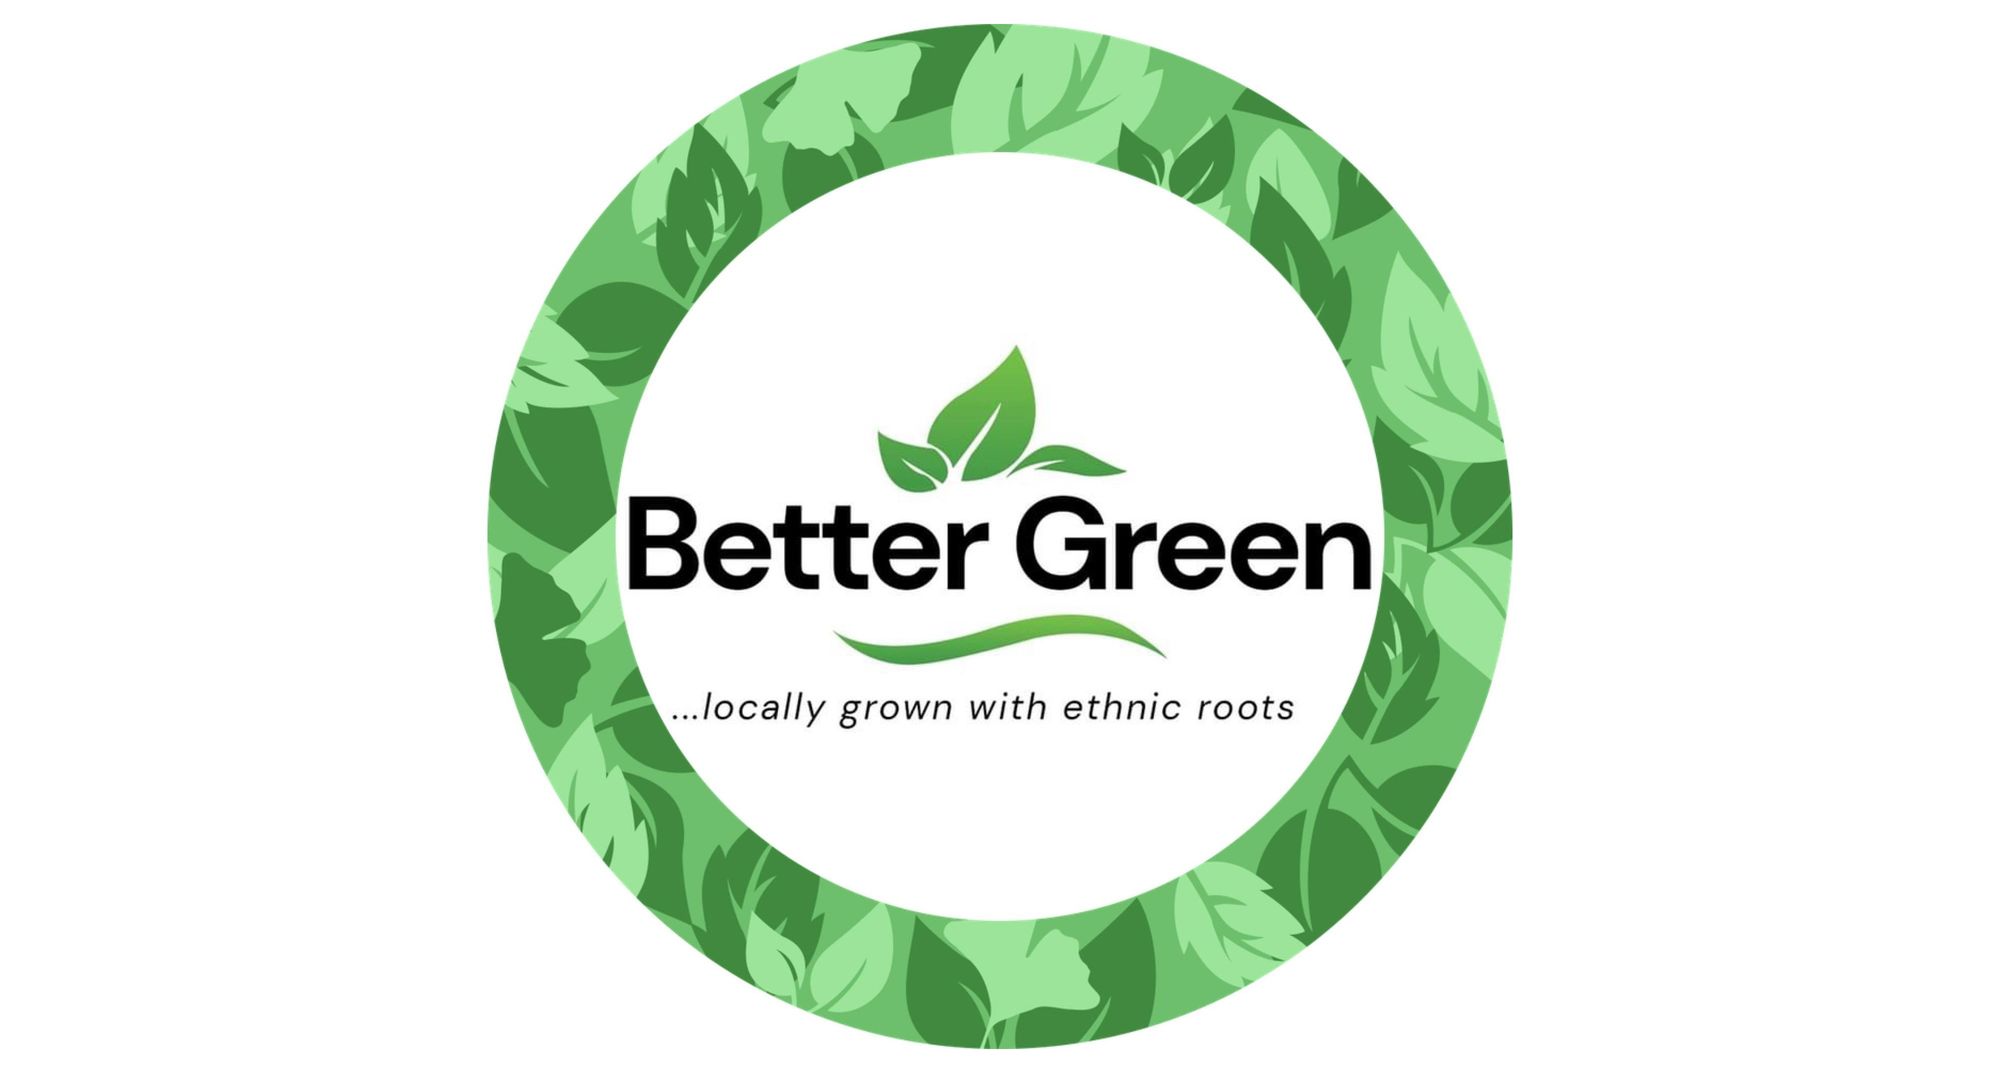 Quality, Organic, Healthy, and Nutritive - Better Greens